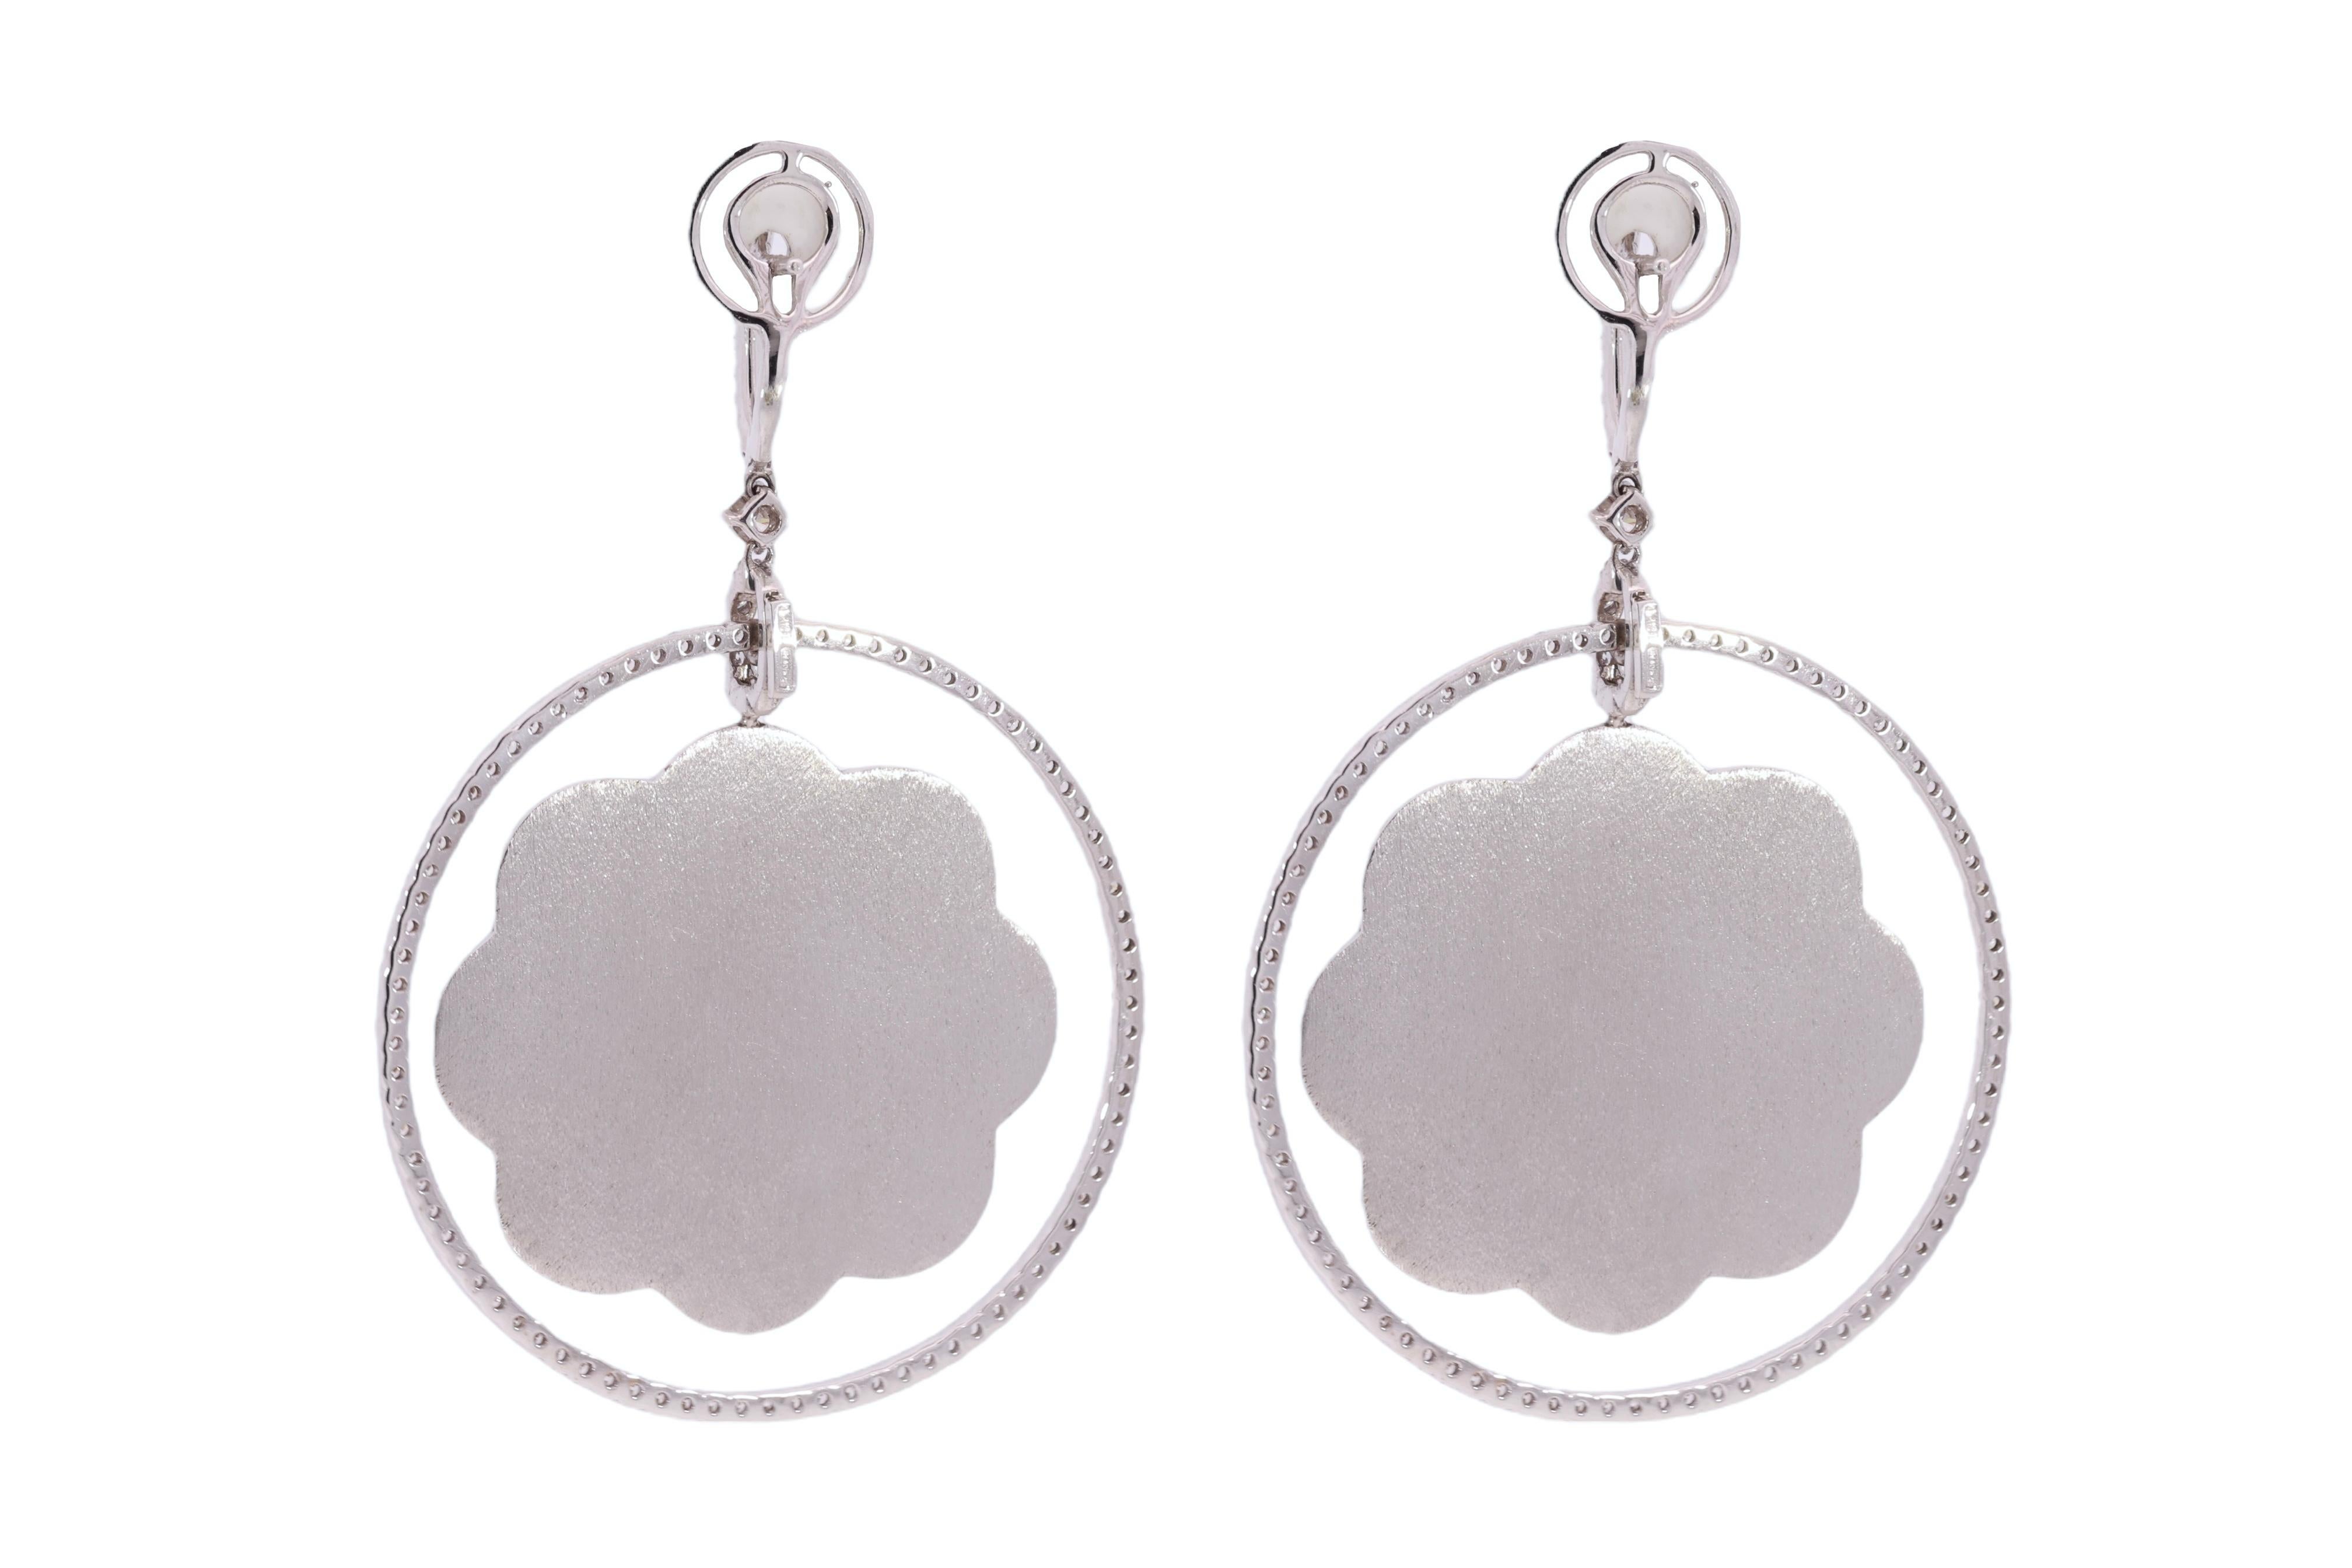 18kt White Gold Crivelli Earrings with 4.92 Carat Diamonds and Mother of Pearl For Sale 1